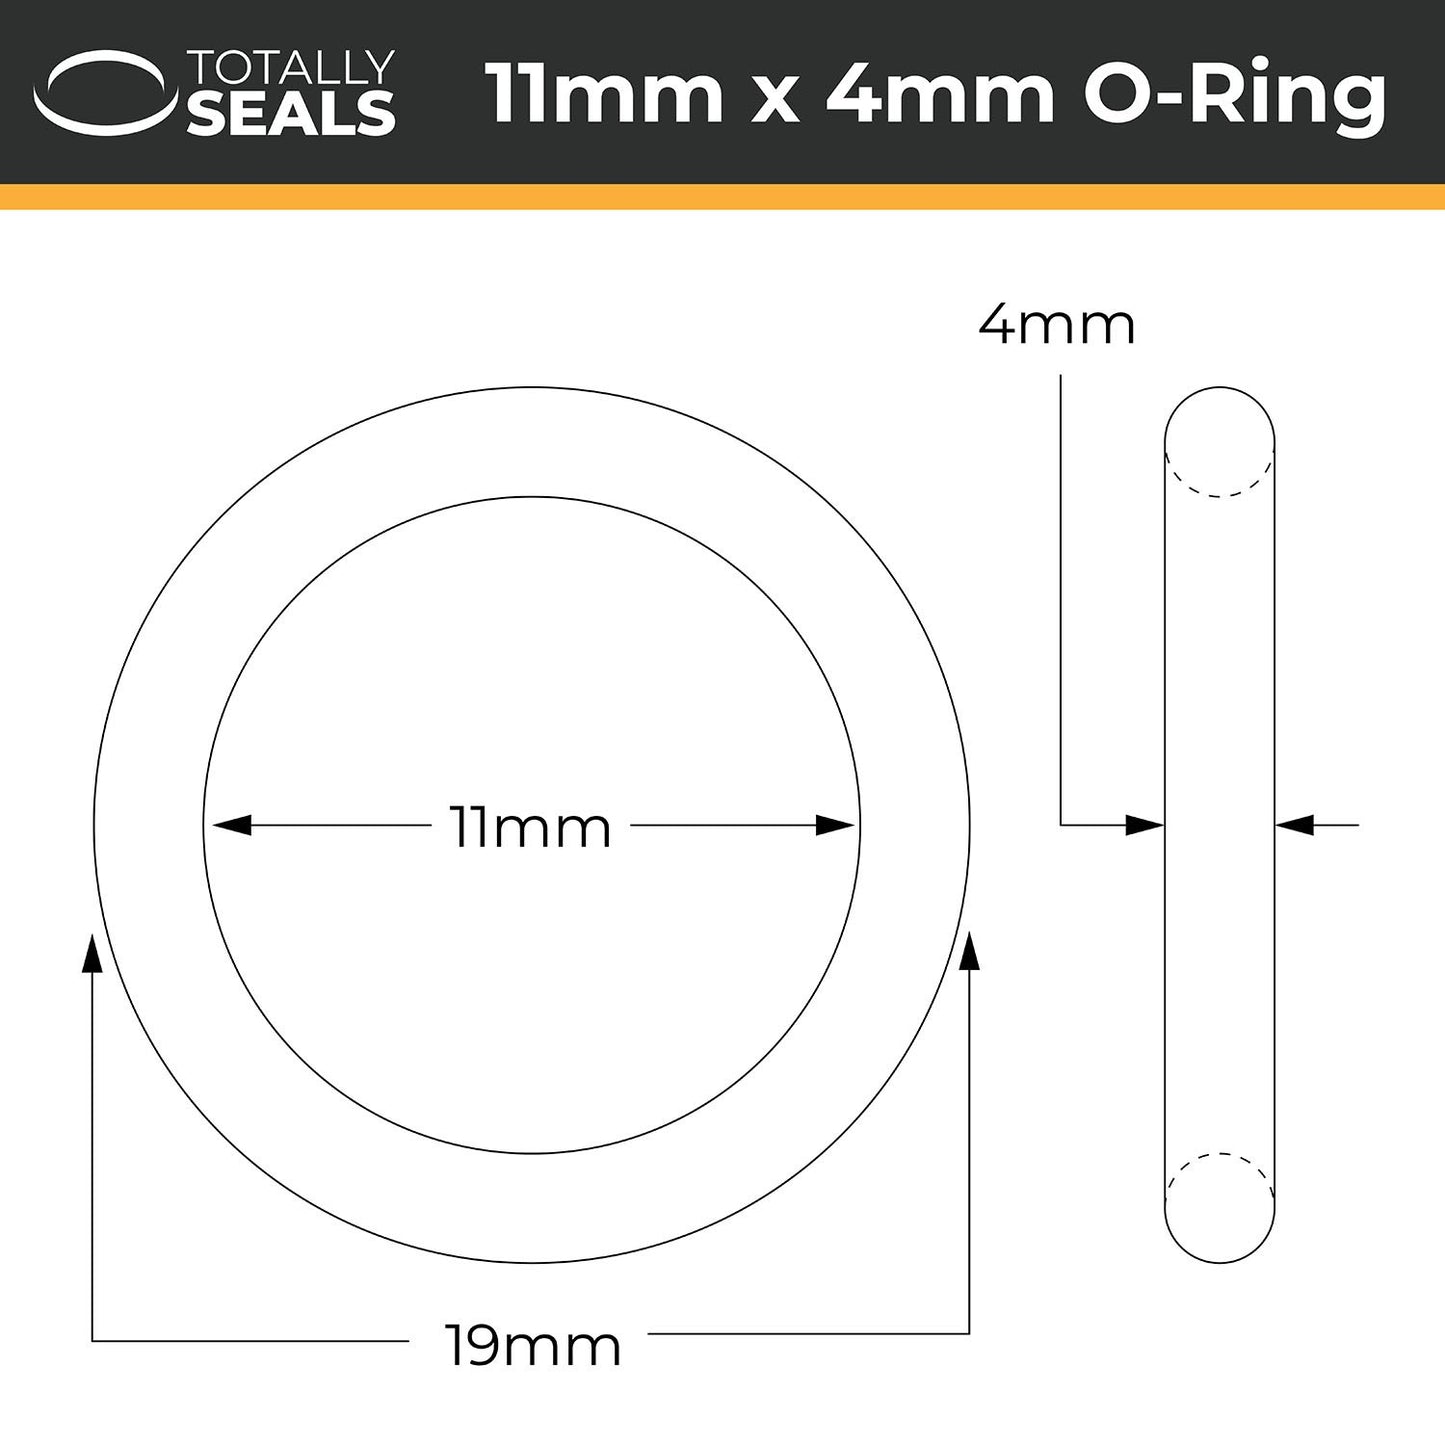 11mm x 4mm (19mm OD) Nitrile O-Rings - Totally Seals®